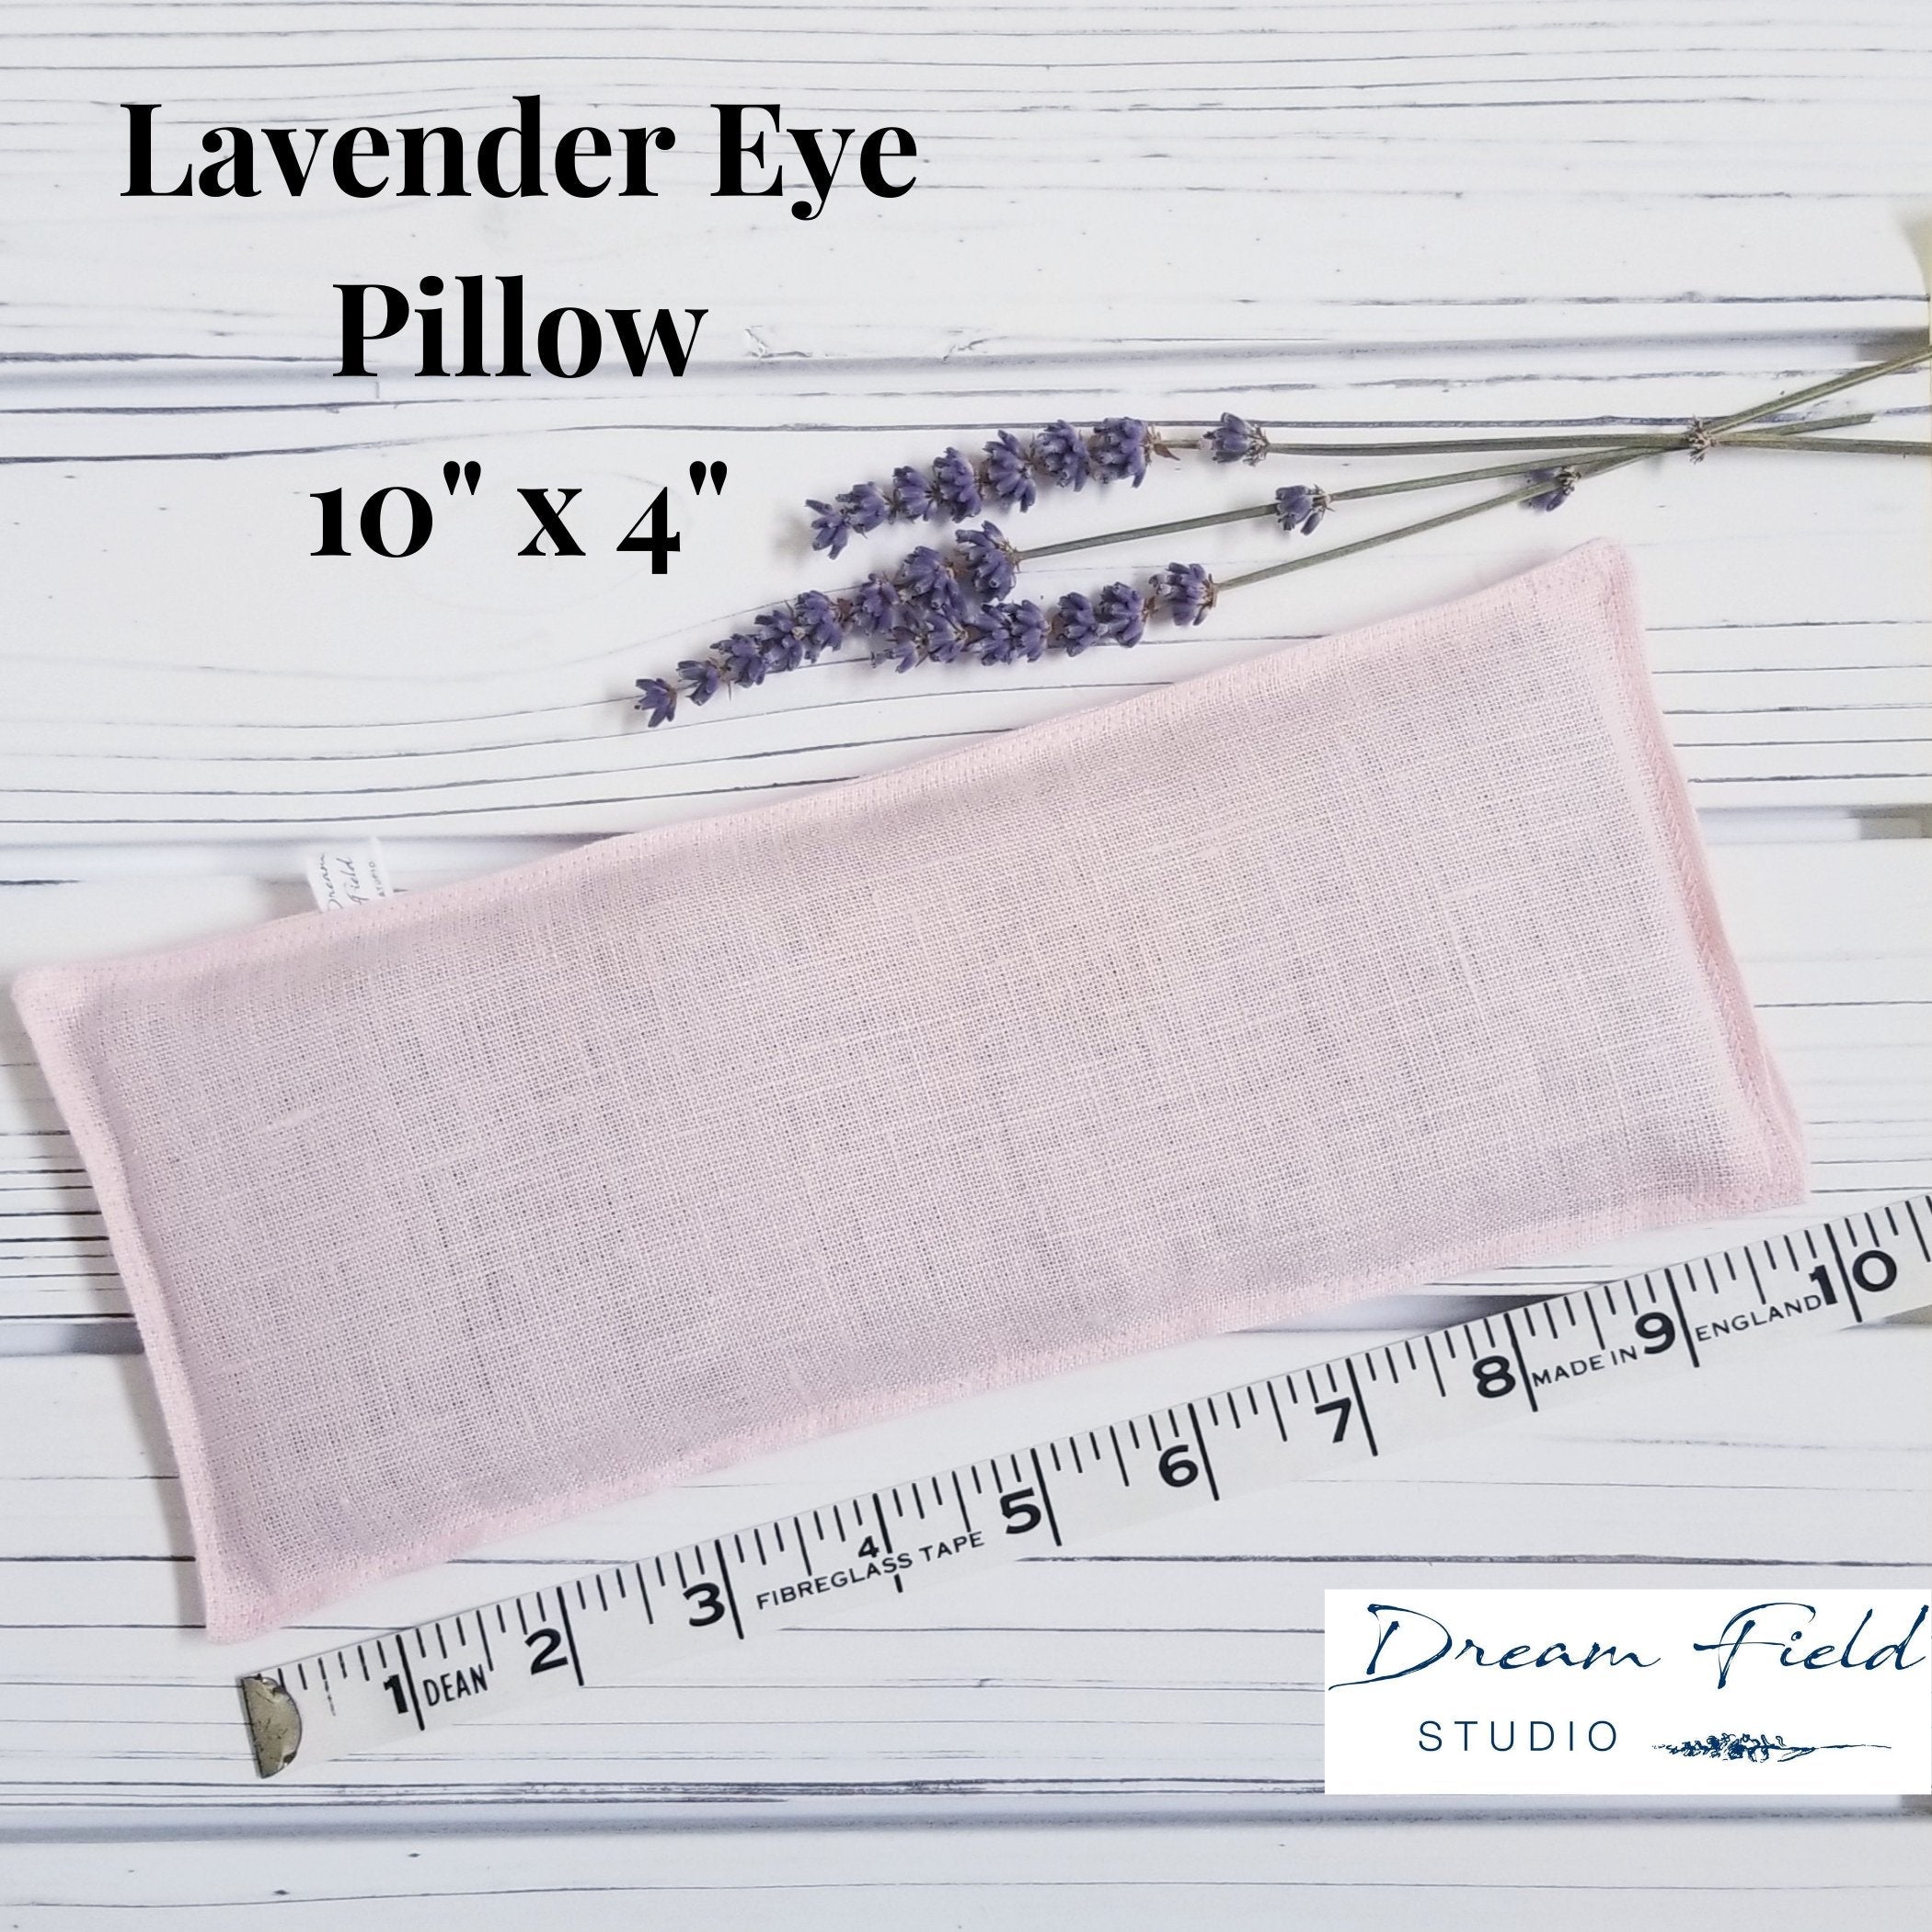 Graphic of 10" x 4" Eye Pillow with Size Specifications Dreamfield Studio